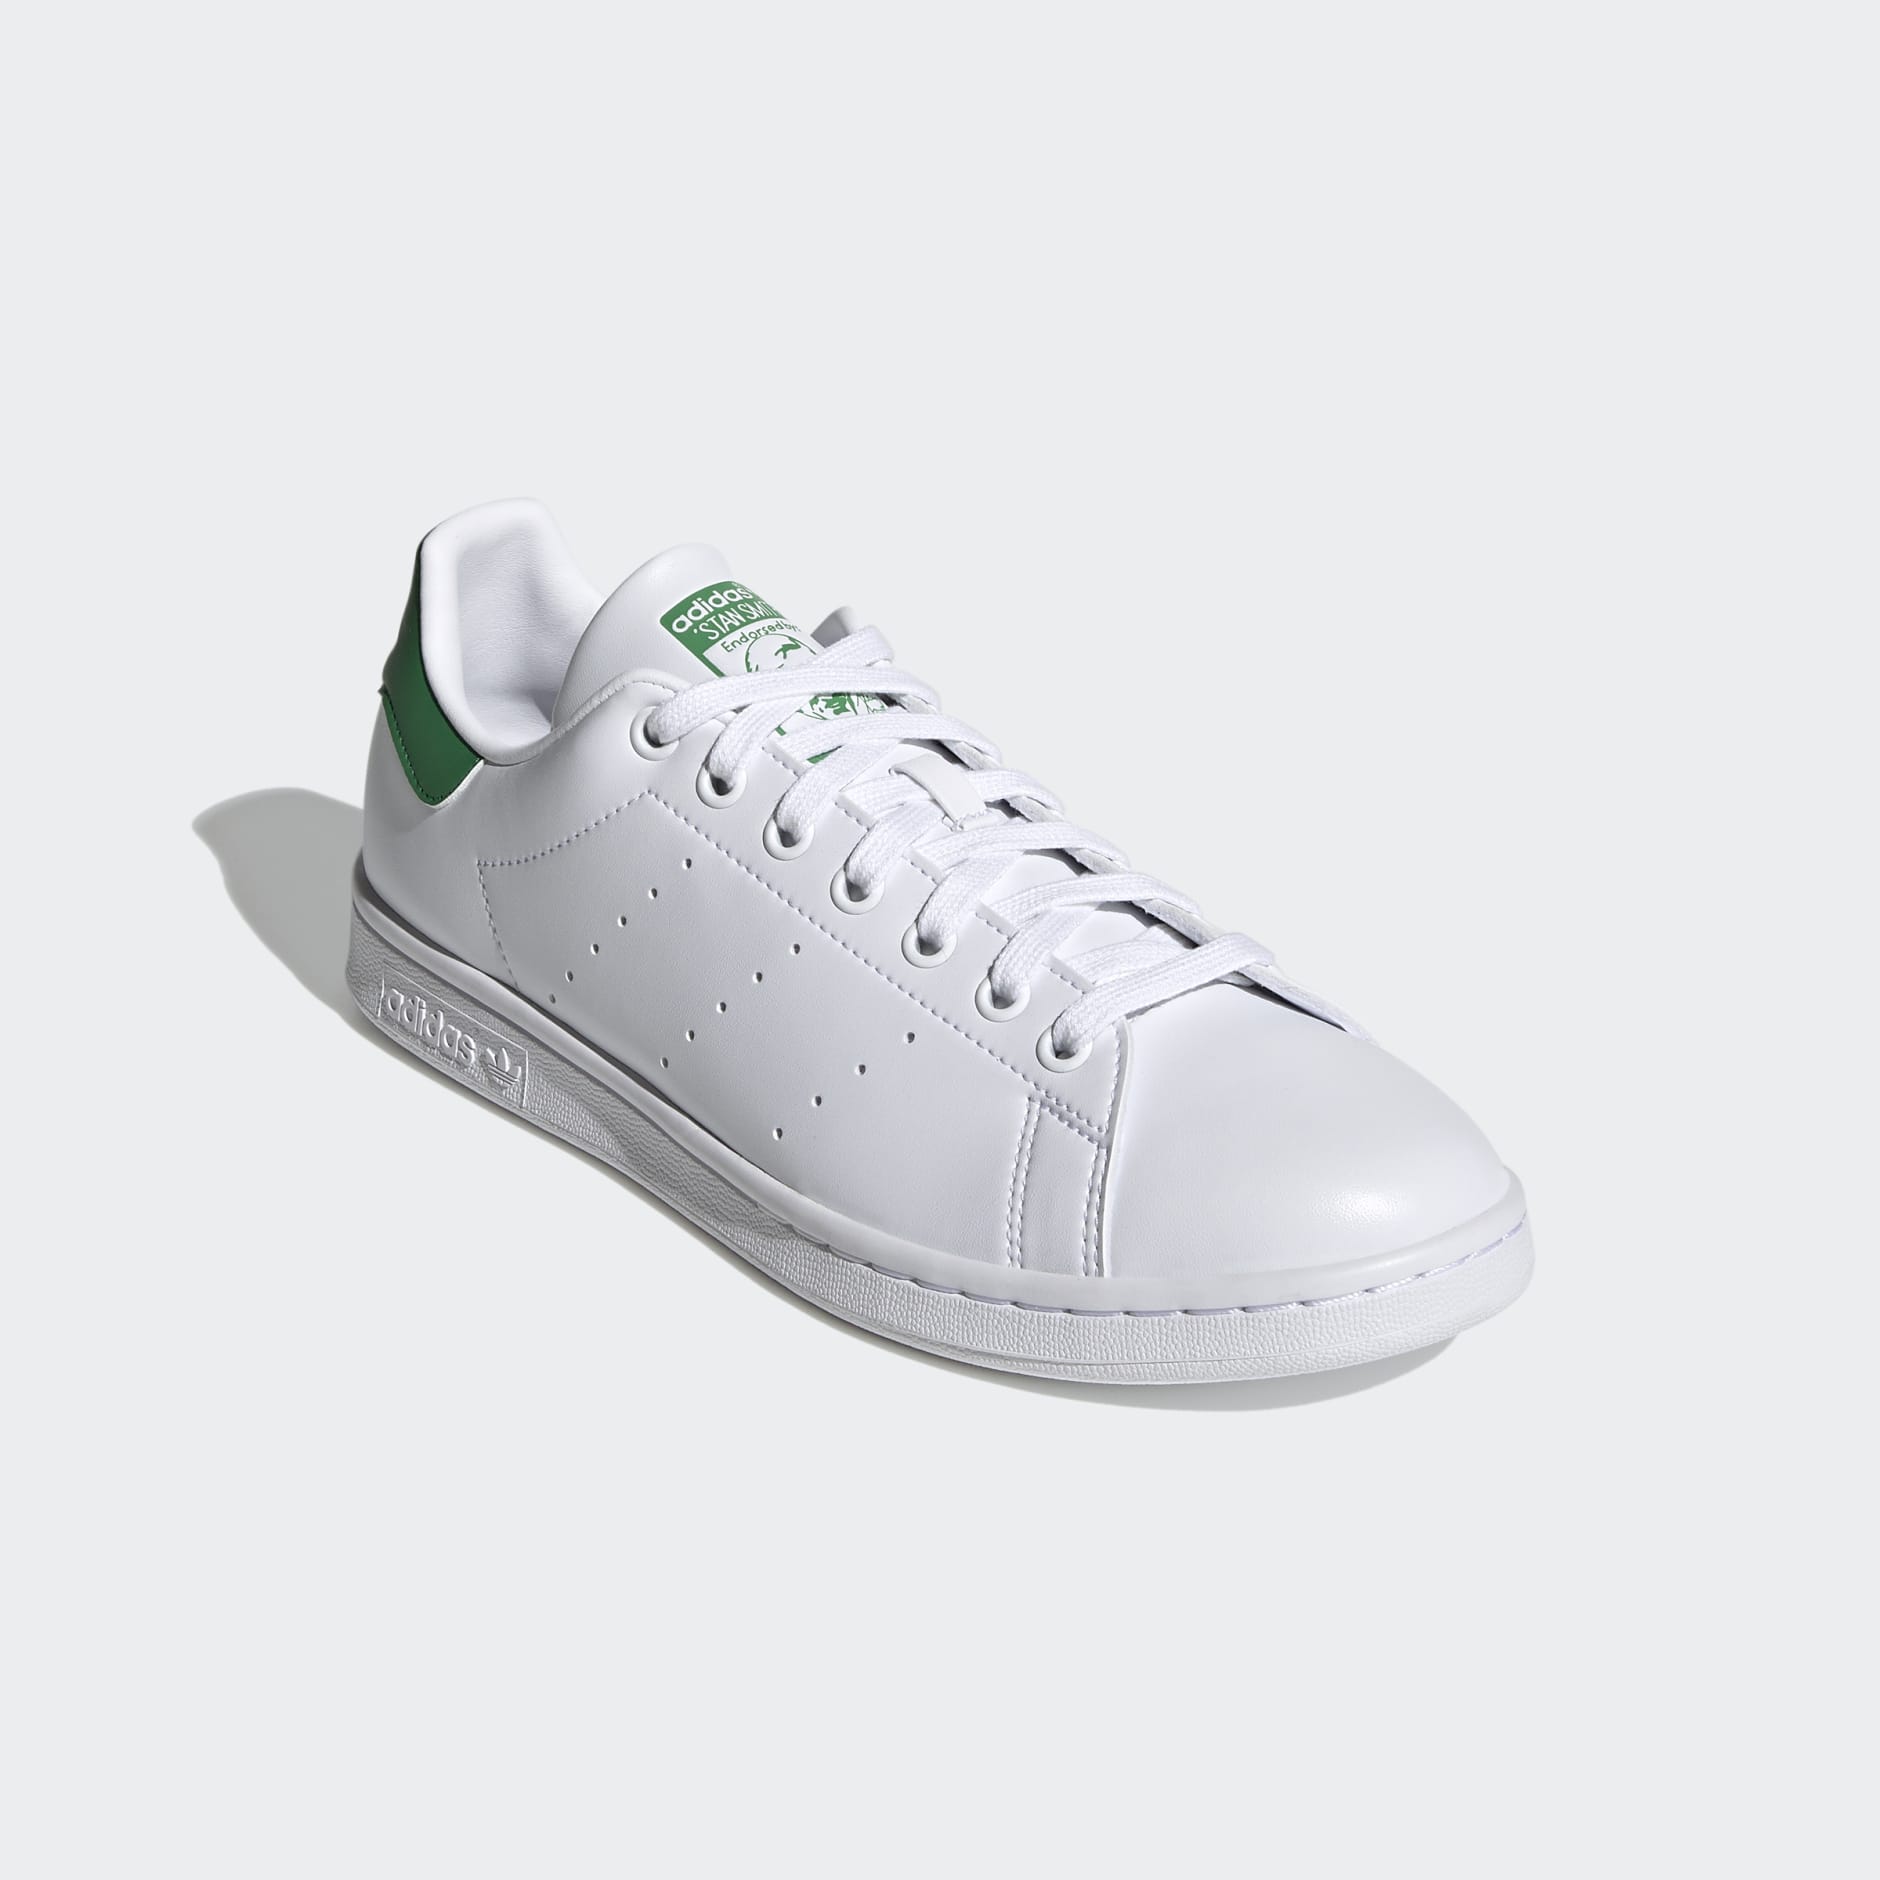 adidas Originals leather sneakers Stan Smith white color buy on PRM